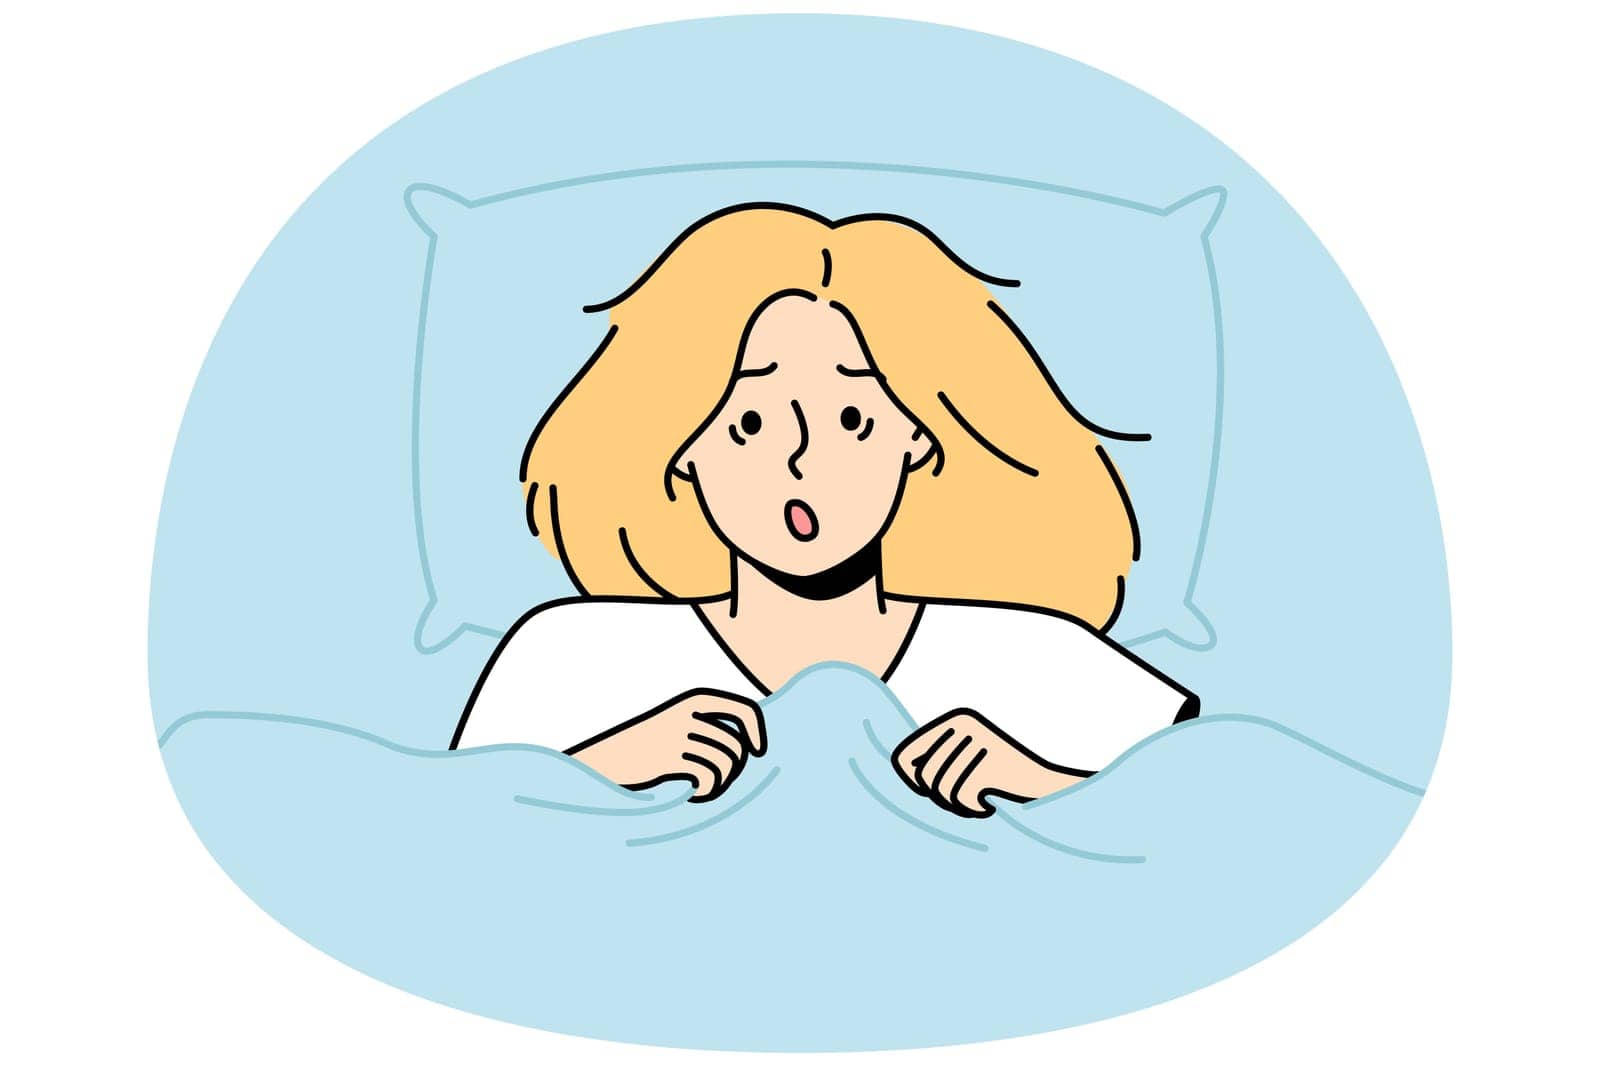 Portrait of shocked blonde lying in bed at home. Astonished woman peeks out from blanket. Girl woke up in horror after nightmare in dream. Insomnia vector outline illustration isolated on blue.